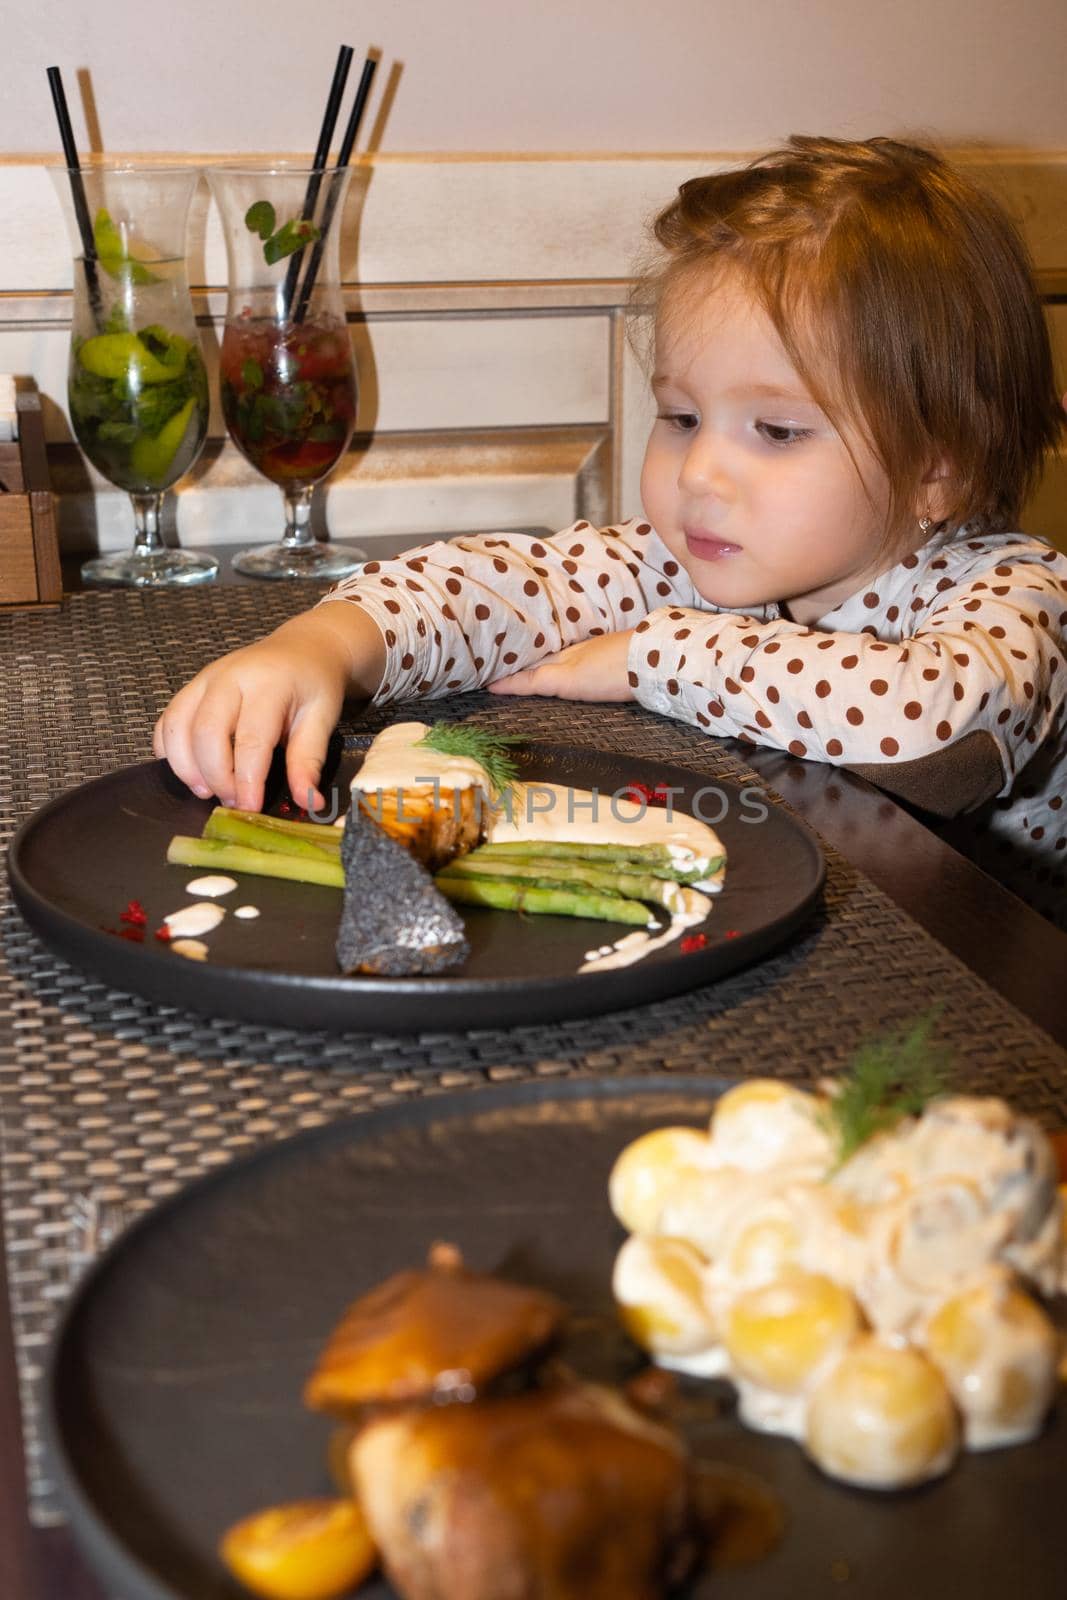 A little girl in a restaurant looks at a freshly brought fish dish on the table in front of her and wants to take some caviar from the plate with her hands to taste it. the dish looks very appetizing and the daughter could not resist and tries it right with her hands. in the foreground in the frame potatoes in mushroom sauce and pieces of meat